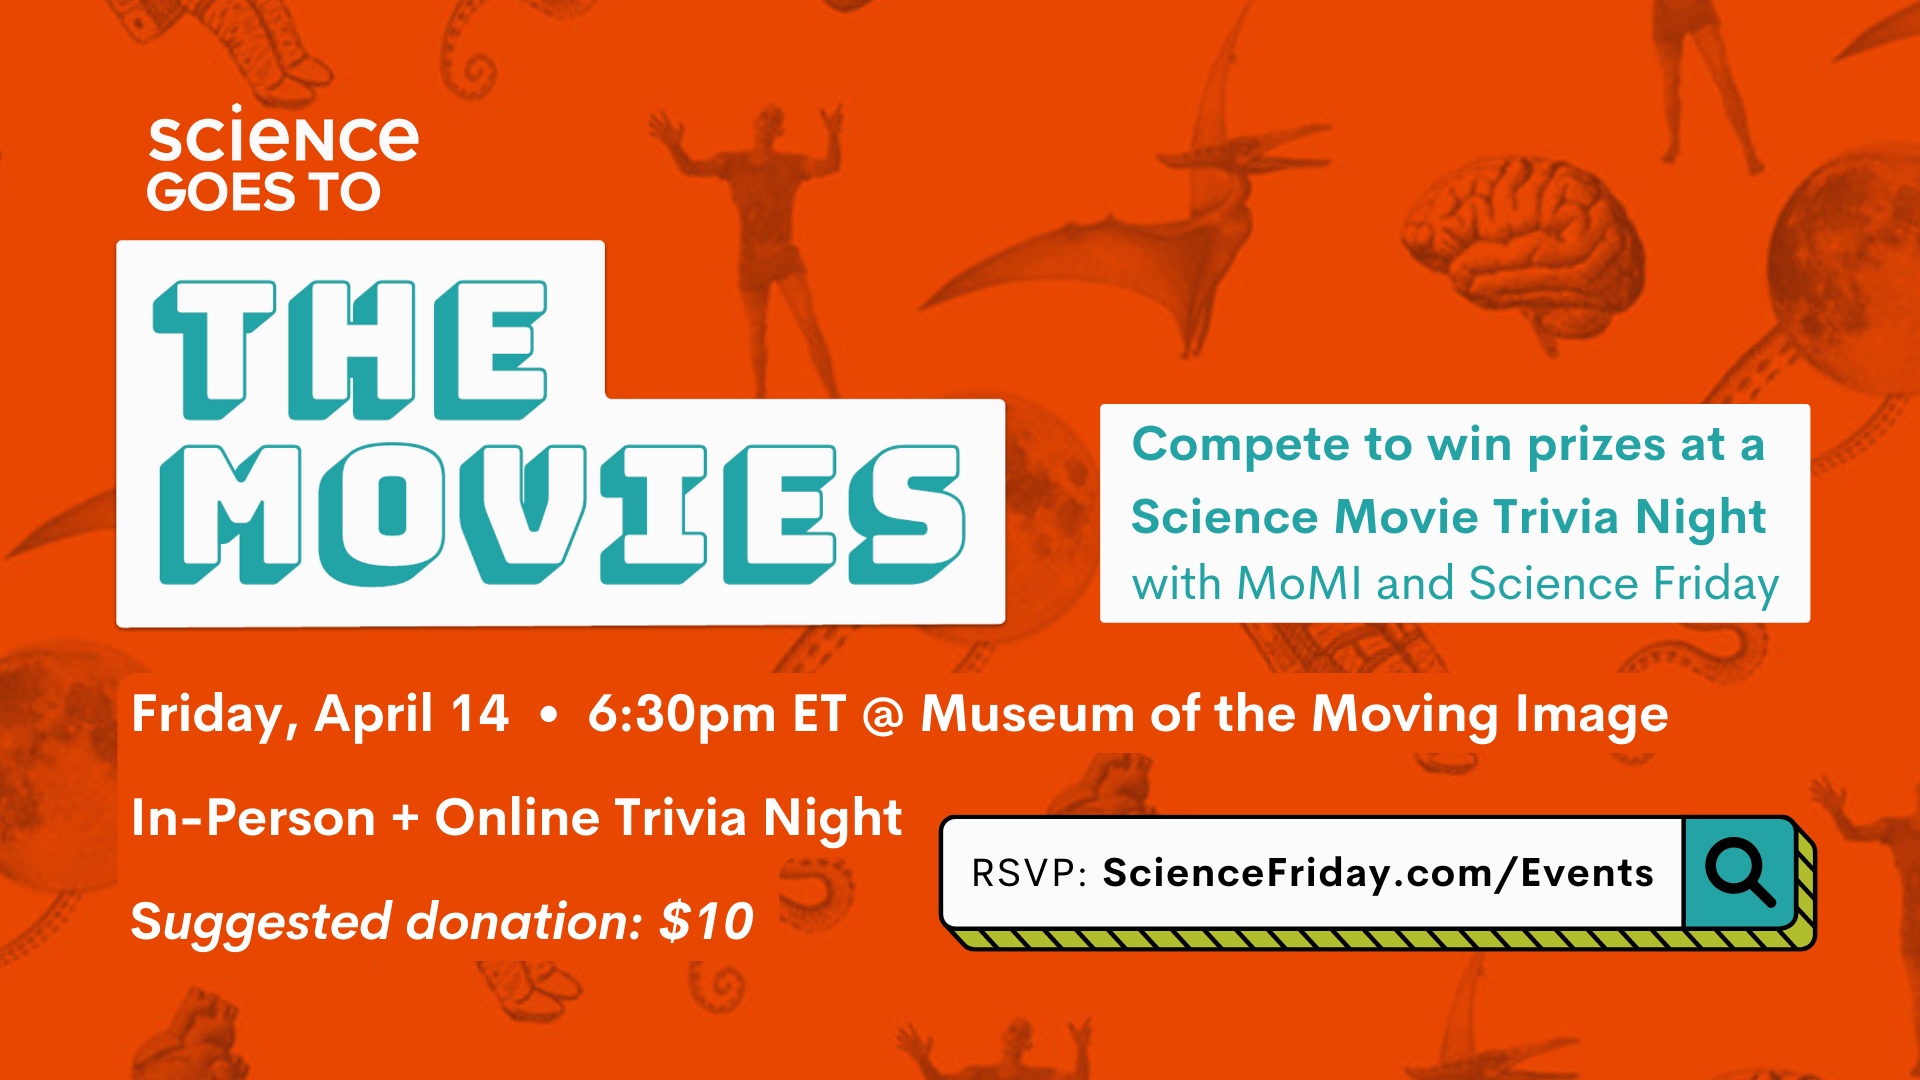 Event promotional image. In top left corner, the Science Goes to the Movies logo, plus event description that reads: "Compete to win prizes at a Science Movie Trivia Night with MoMI and Science Friday". Friday, April 14, 6:30pm ET @ Museum of the Moving Image, In-Person + Online Trivia Night, suggested donation: $10. RSVP link: ScienceFriday.com/Events. The background is orange with faded images of science topics: a moon with tentacles, a brain, an astronaut, a zombie, a pterodactyl, and more.